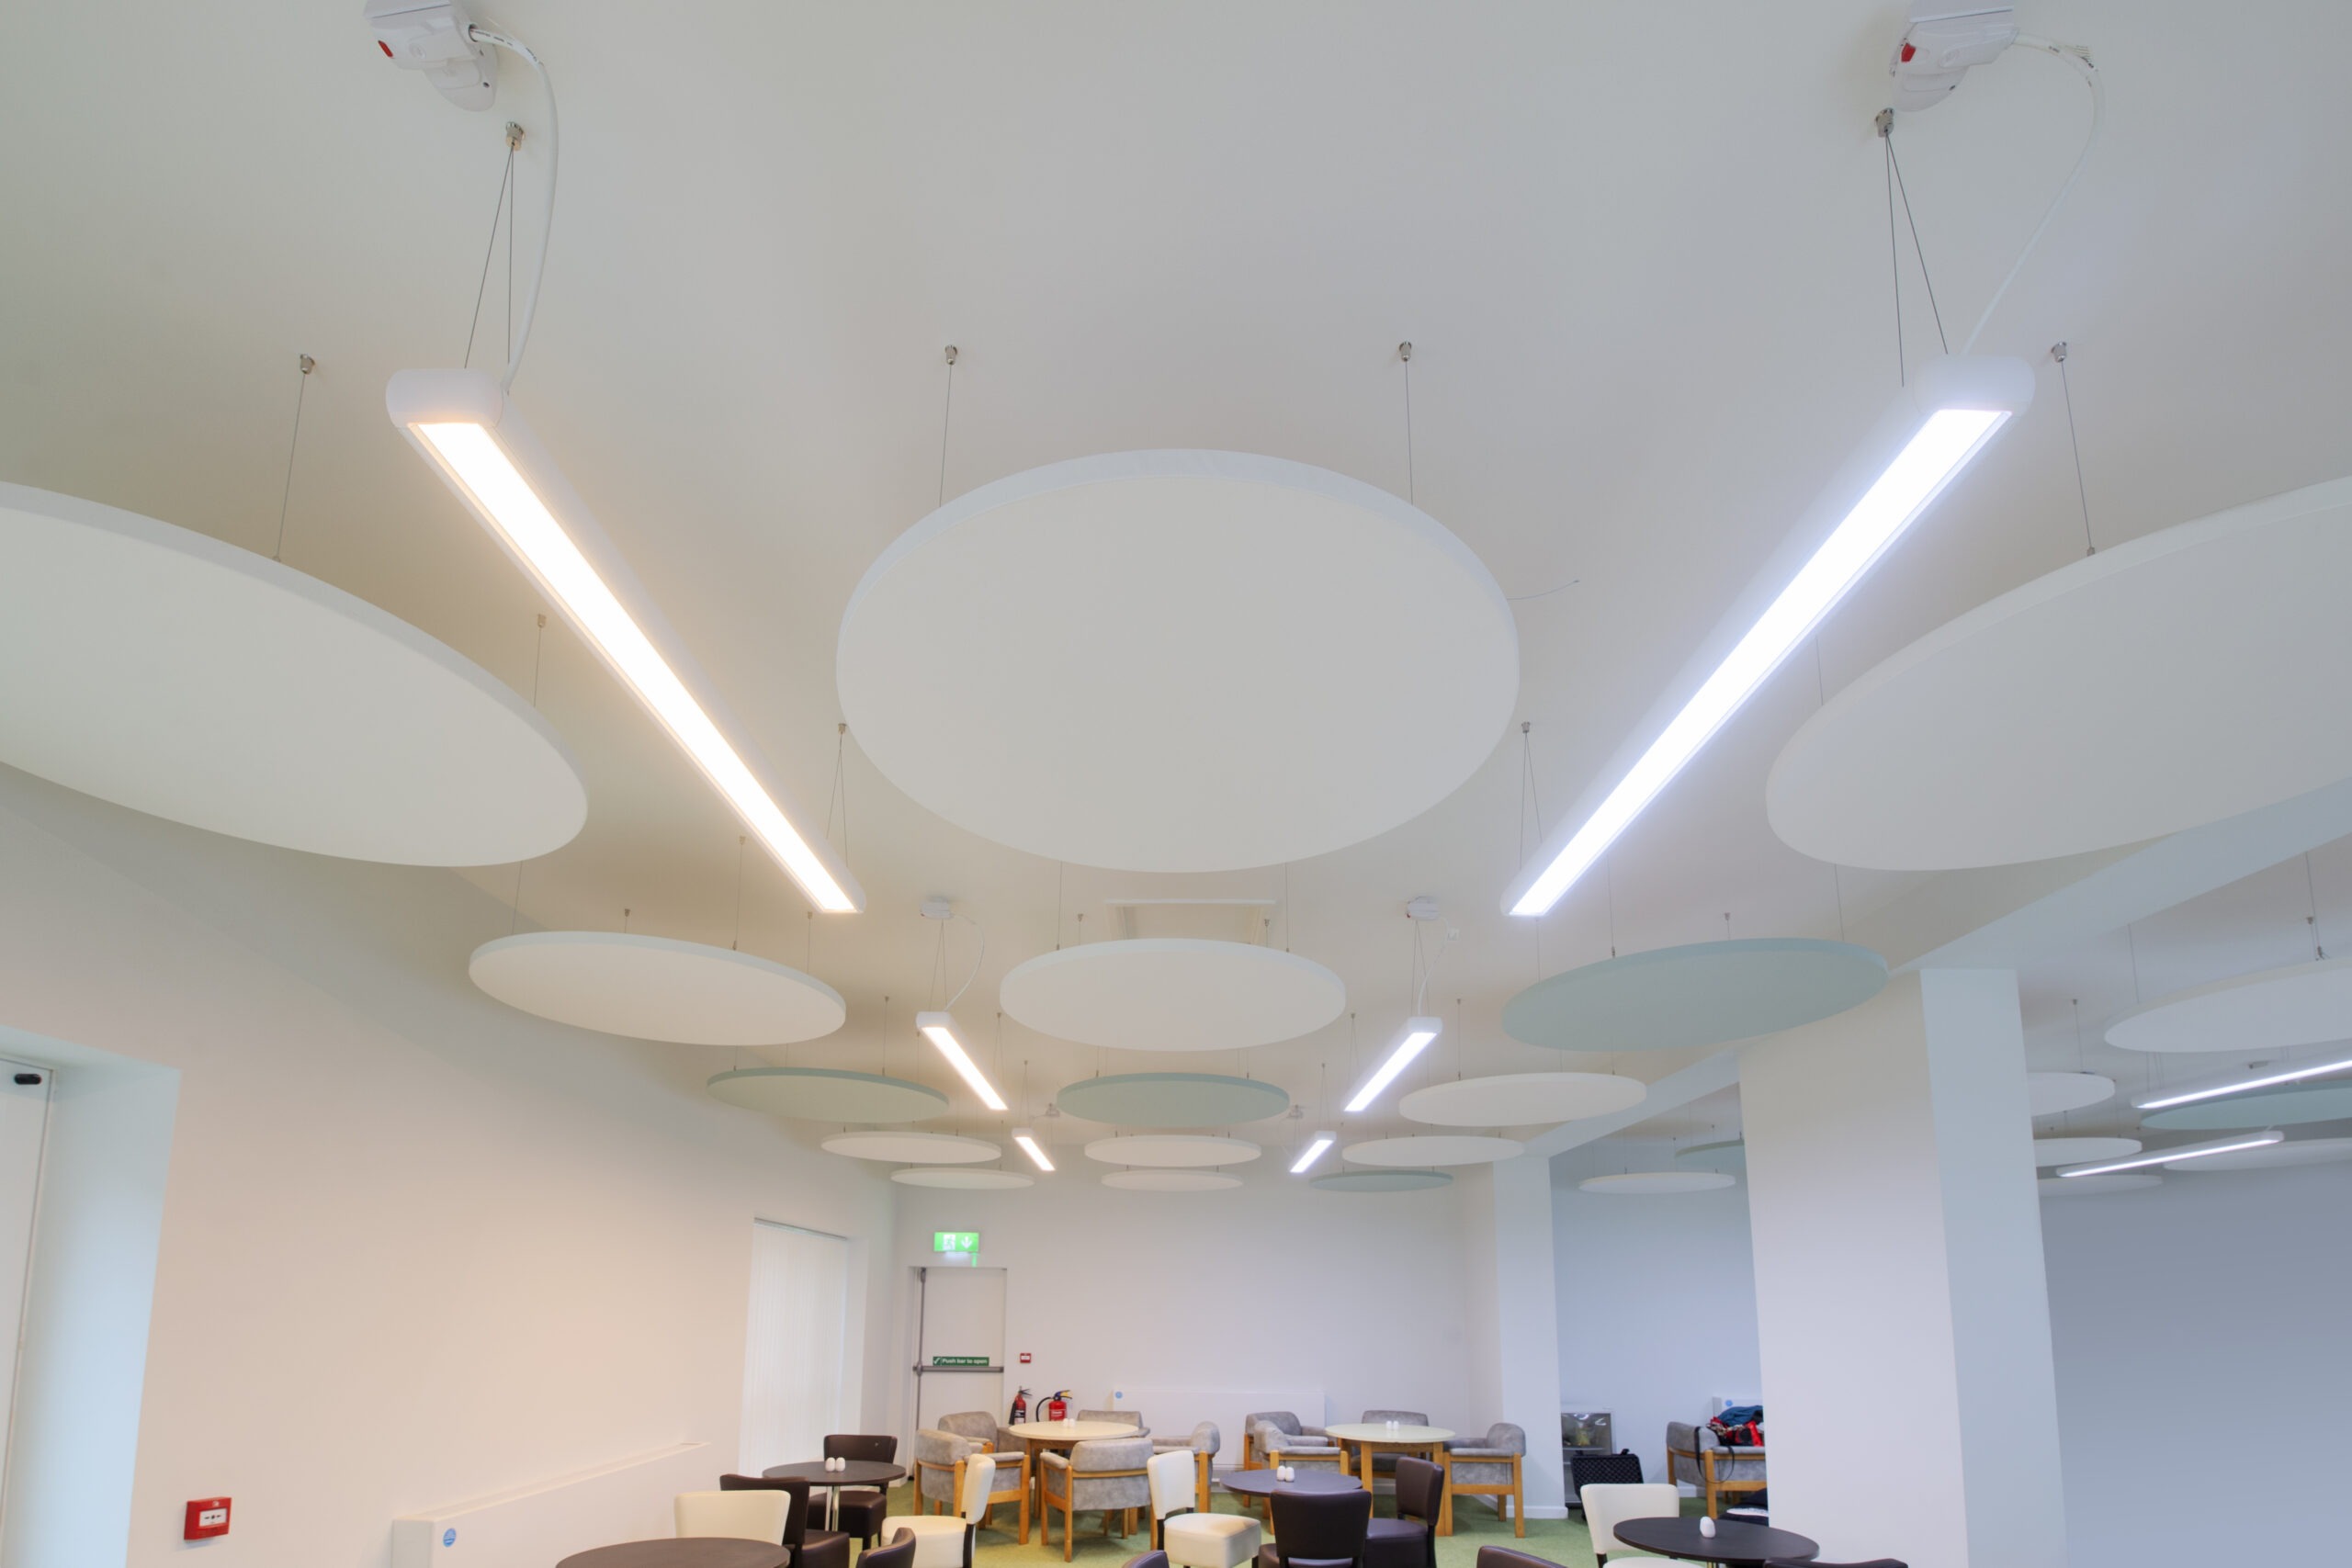 Tamlite Palmer Centre Chepstow dining area suspended LED lighting ceiling